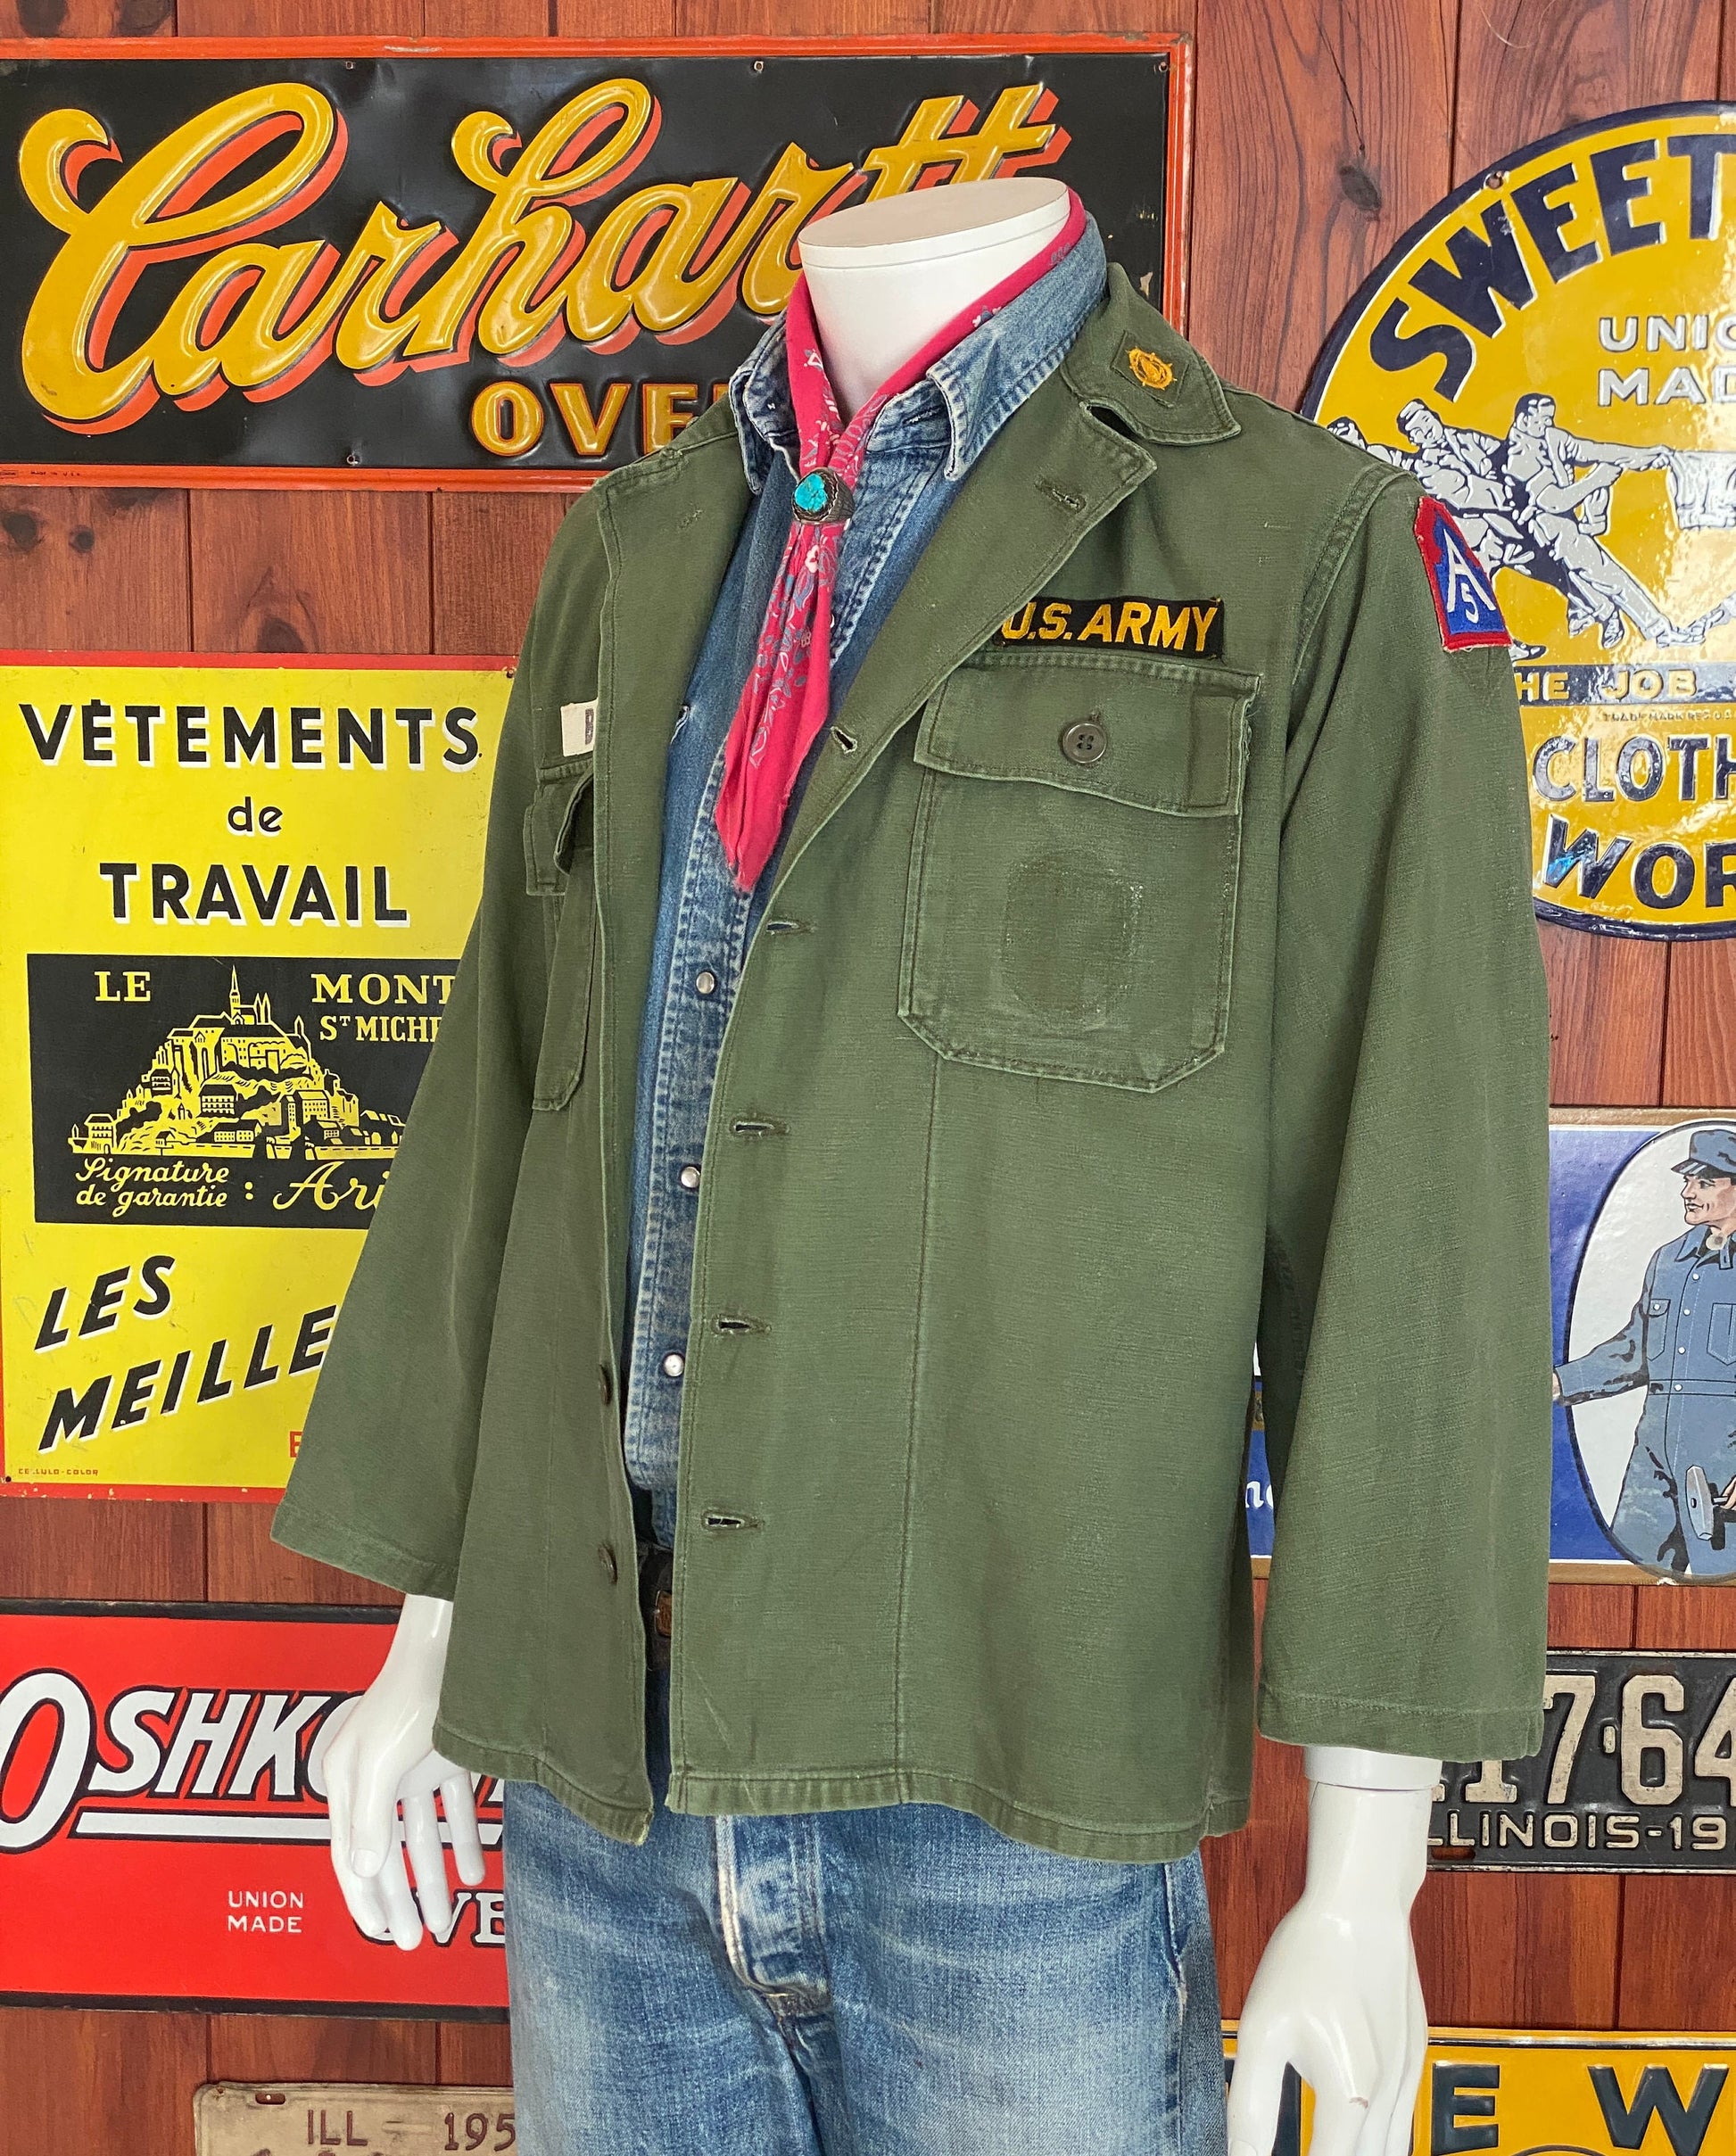 Authentic 1962 Vintage US Army OG 107 Fatigue Shirt - Size M | First Pattern Military Collectible